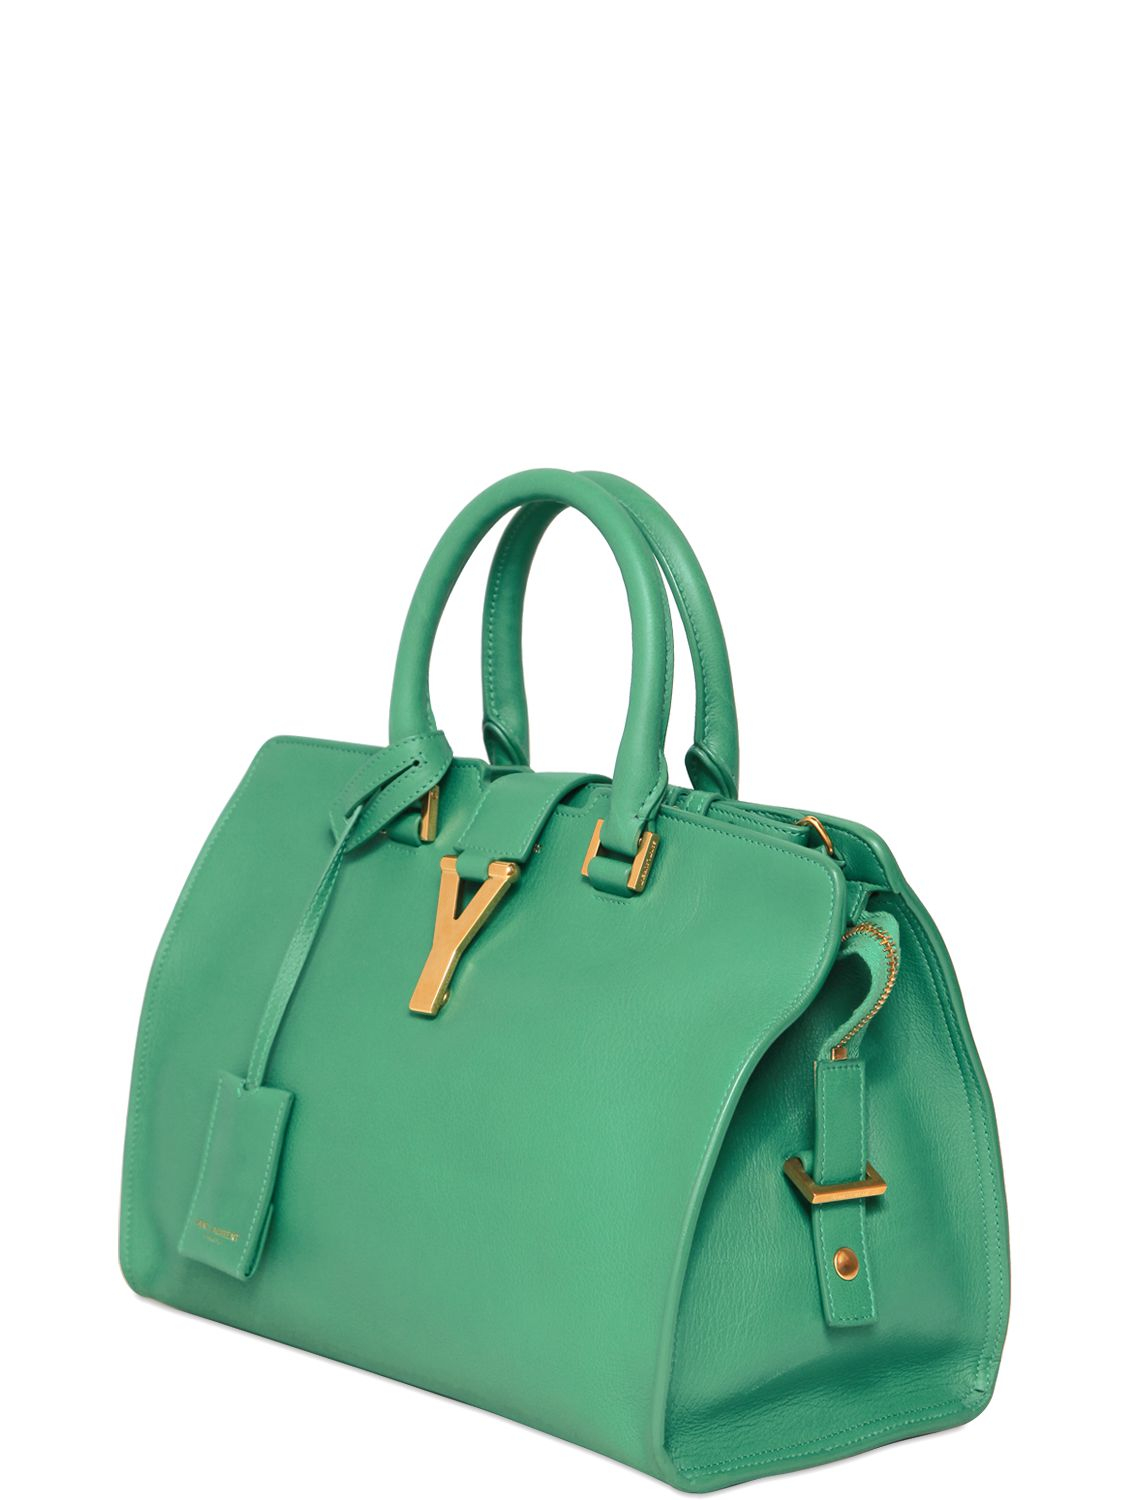 Saint Laurent Small Cabas Y Brushed Leather Bag in Green - Lyst